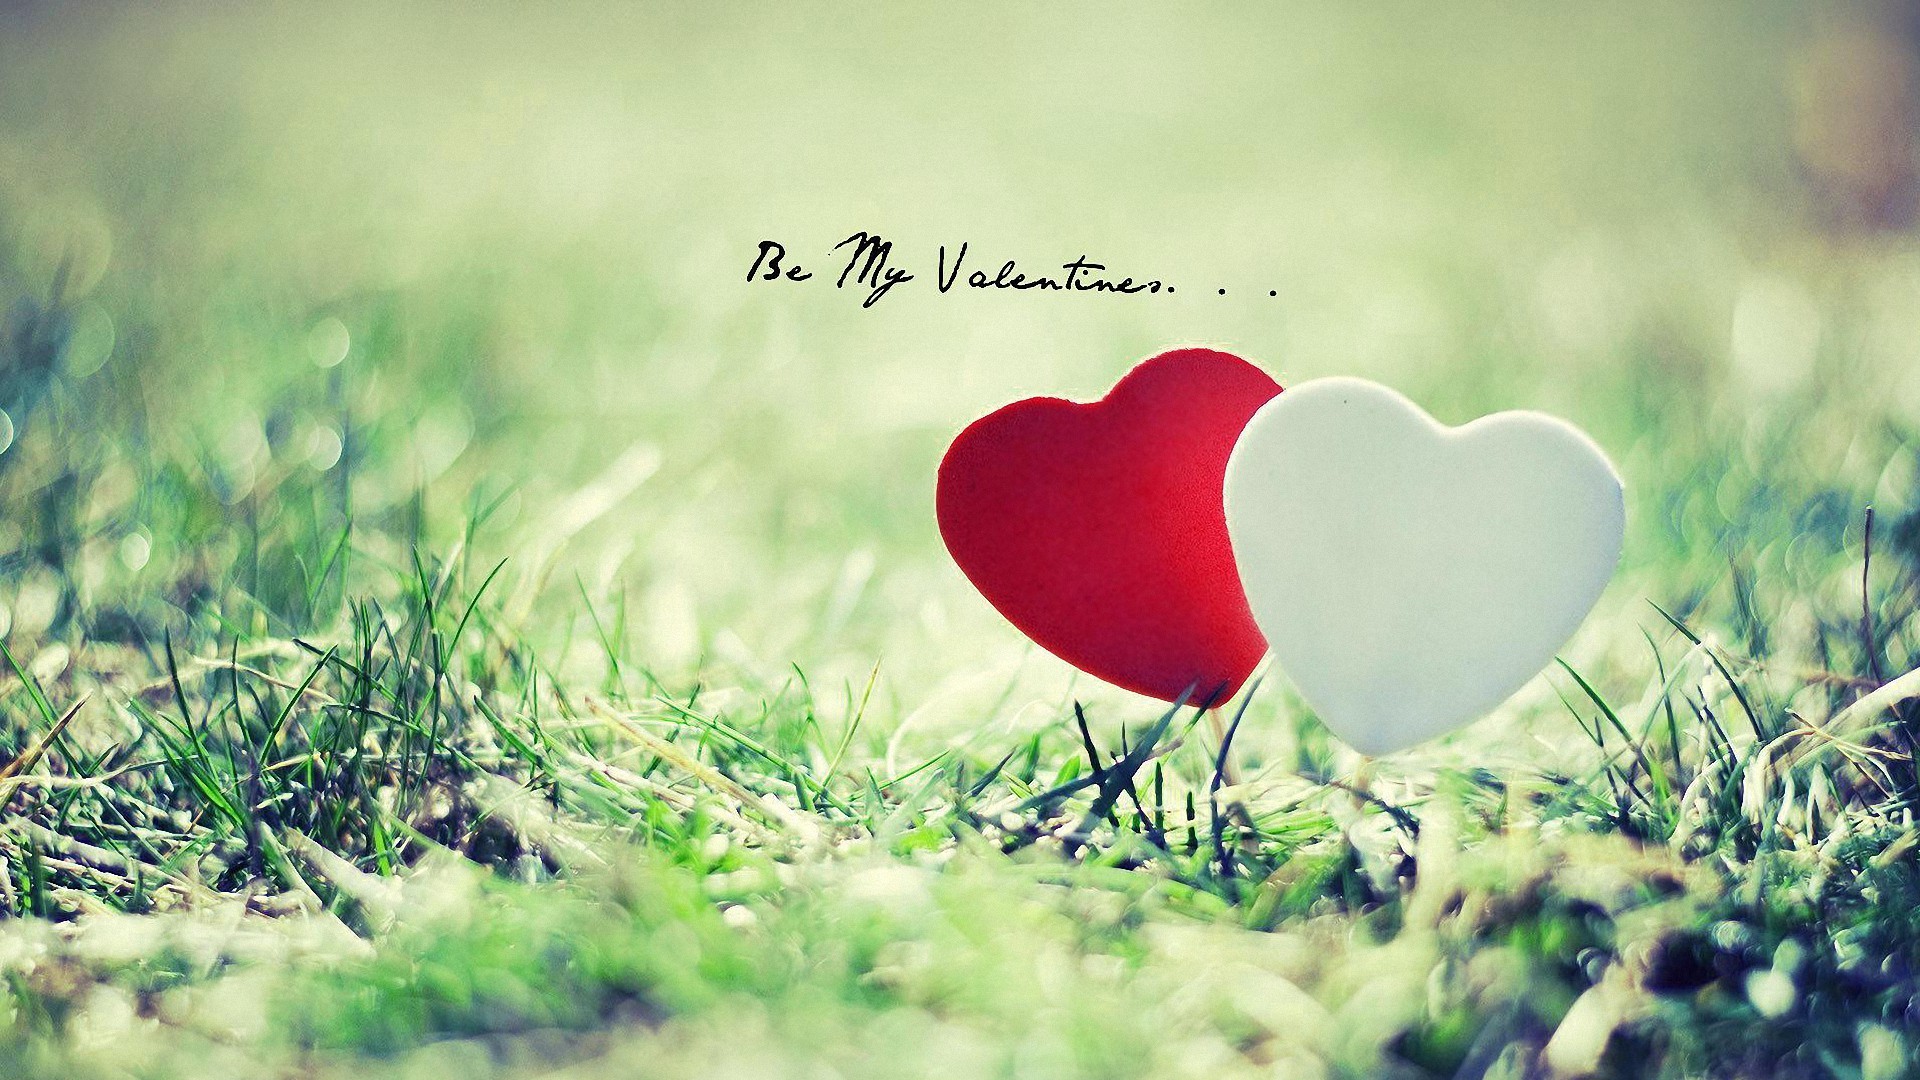 1920x1080 romantic valentines day cute heart HD wallpapers - desktop backgrounds